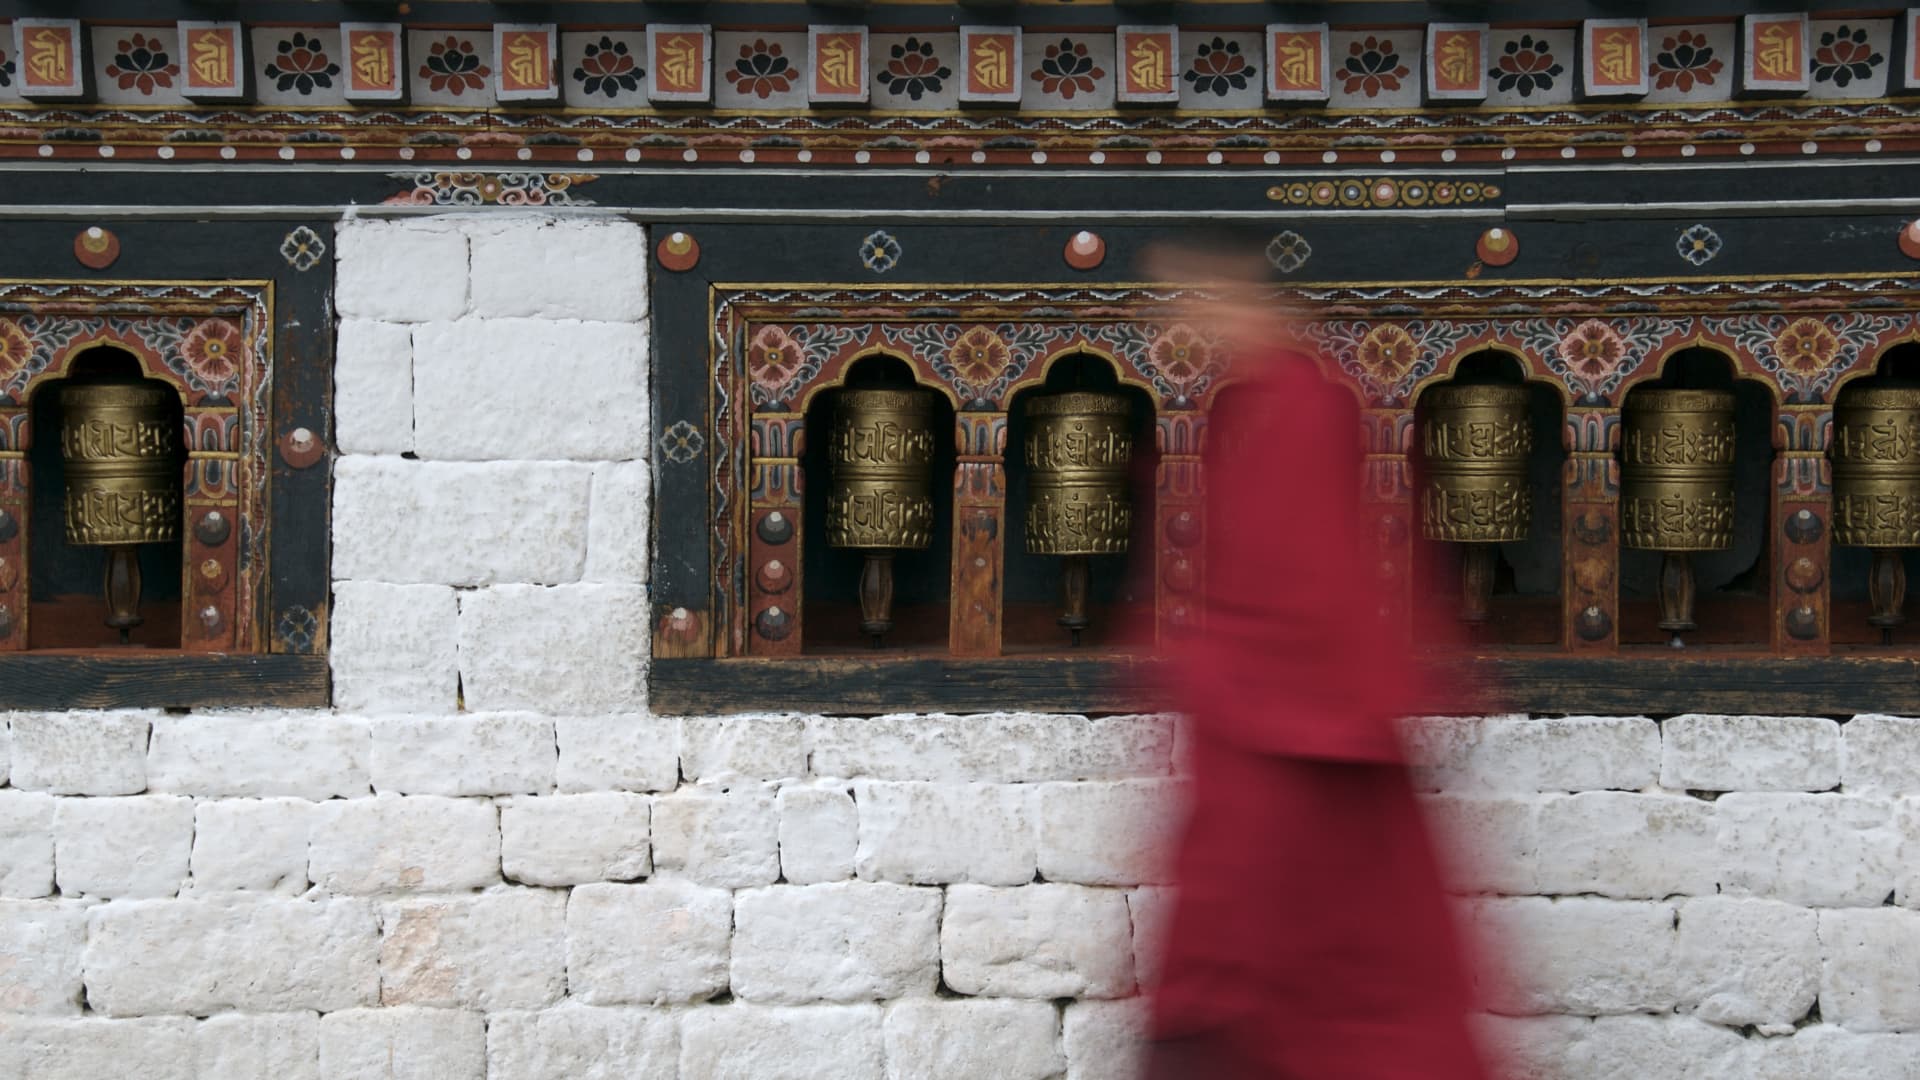 How much does it cost to visit Bhutan? 0 a day plus travel costs